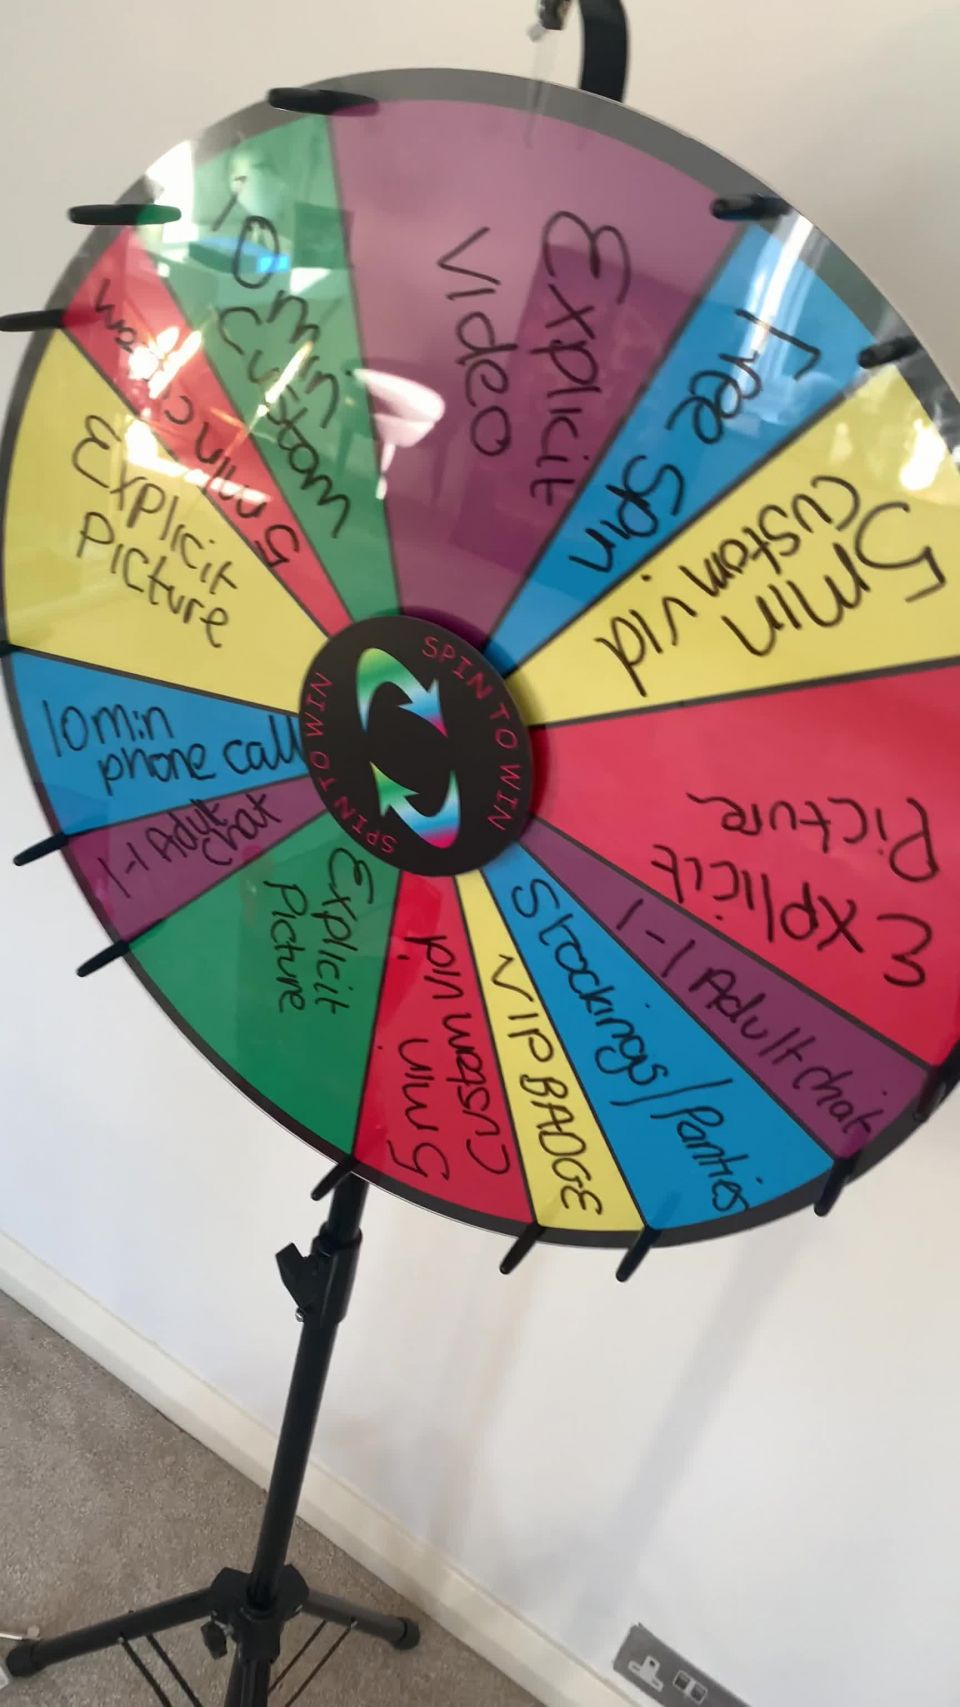 Miss Love - missyasminlove () Missyasminlove - sunday funday spin the wheel tip for one spin for three sp 01-12-2019